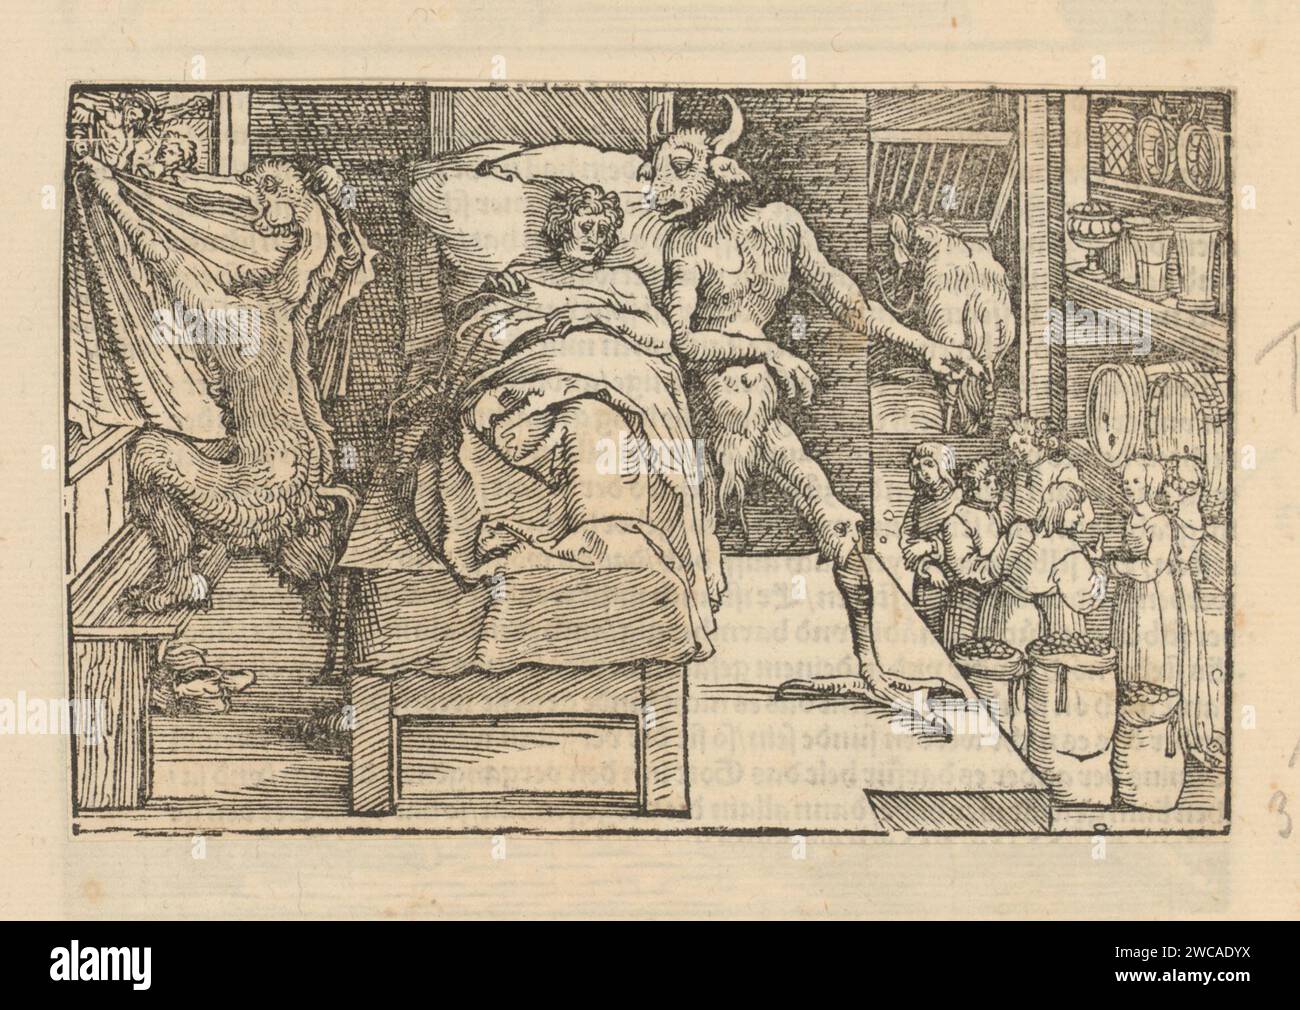 Demons in a deathbed point to the inheritance, Anonymous, Hans Weiditz (II), 1514 - 1532 print Print is part of an album.  paper letterpress printing death struggle, inquiet death; fear of death. devil(s) appearing to mortals, trying to seduce them; temptation. inheritance. orphans Stock Photo